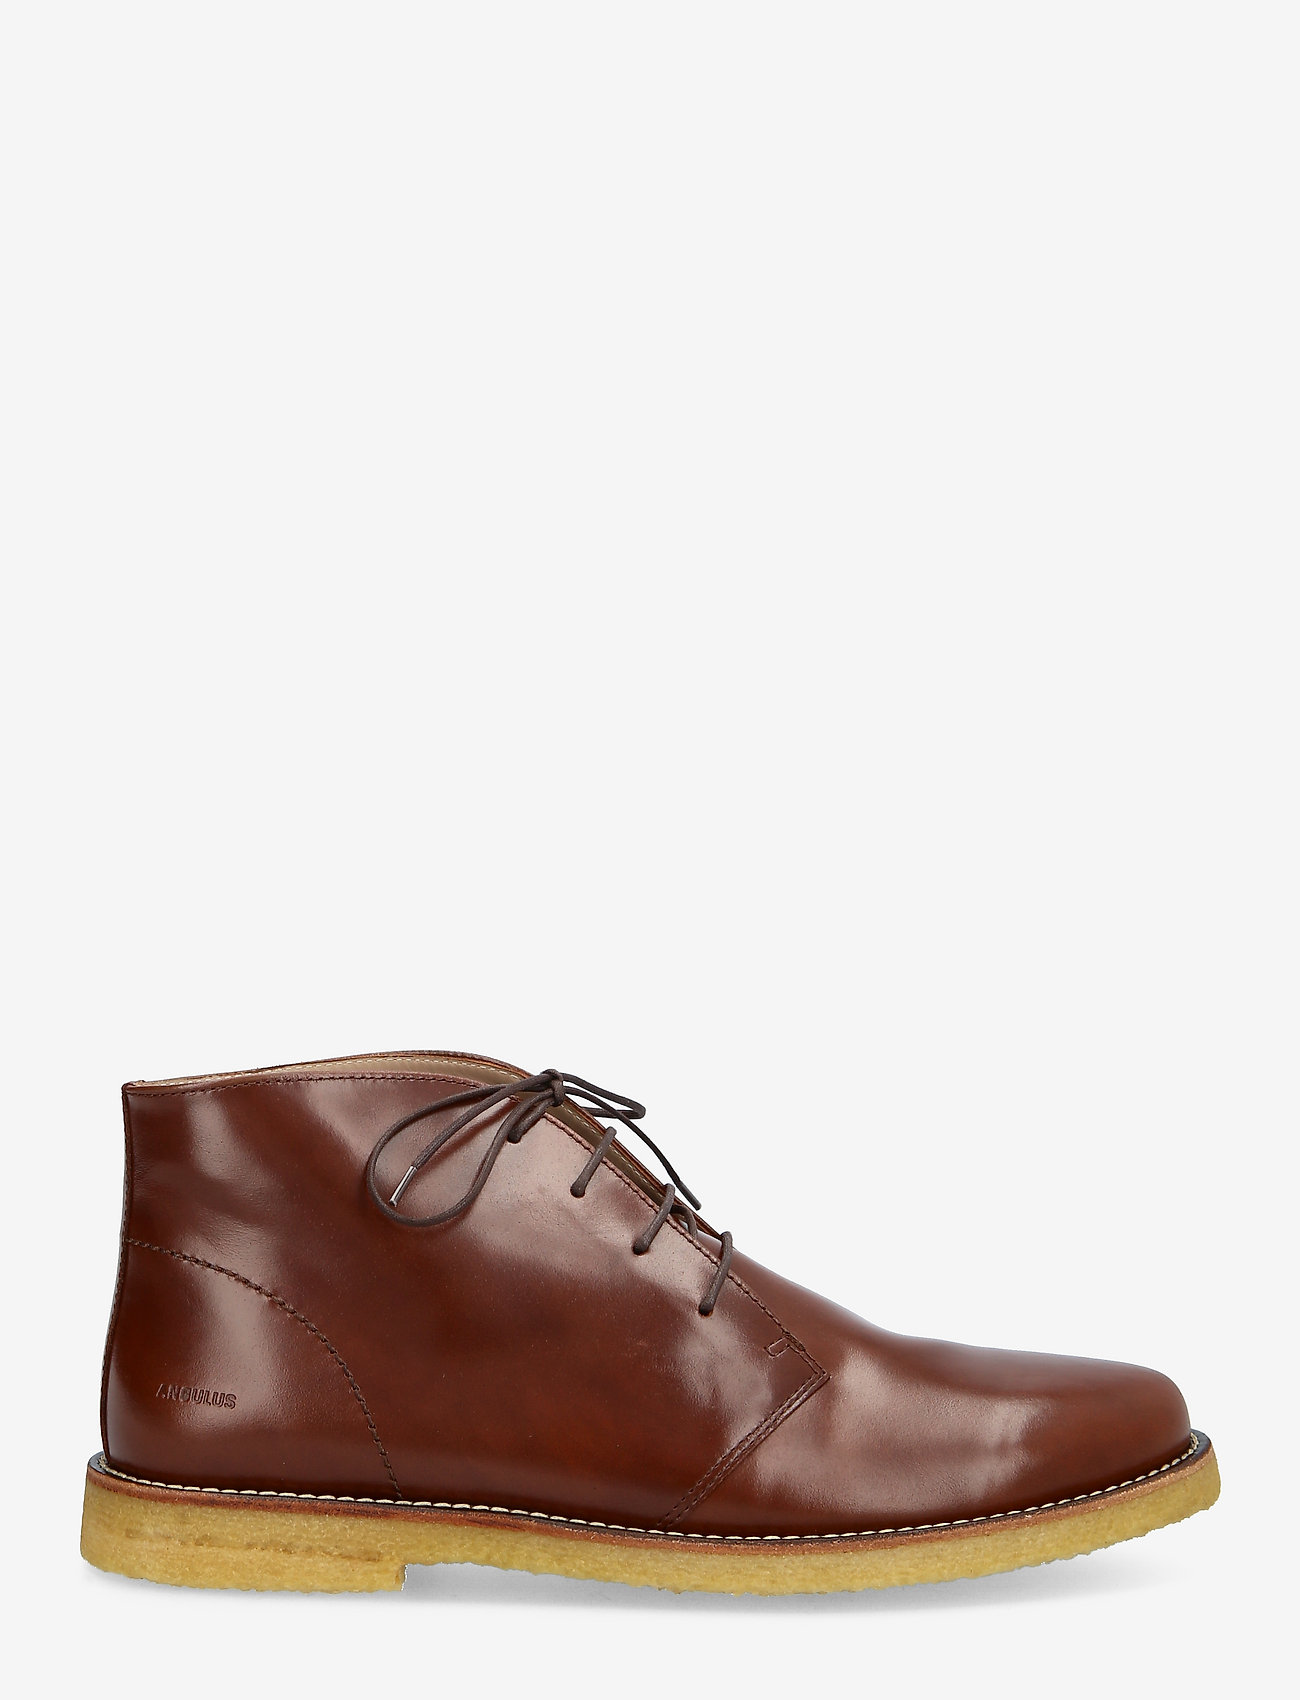 ANGULUS - Shoes - flat - desert boots - 1837 brown - 1